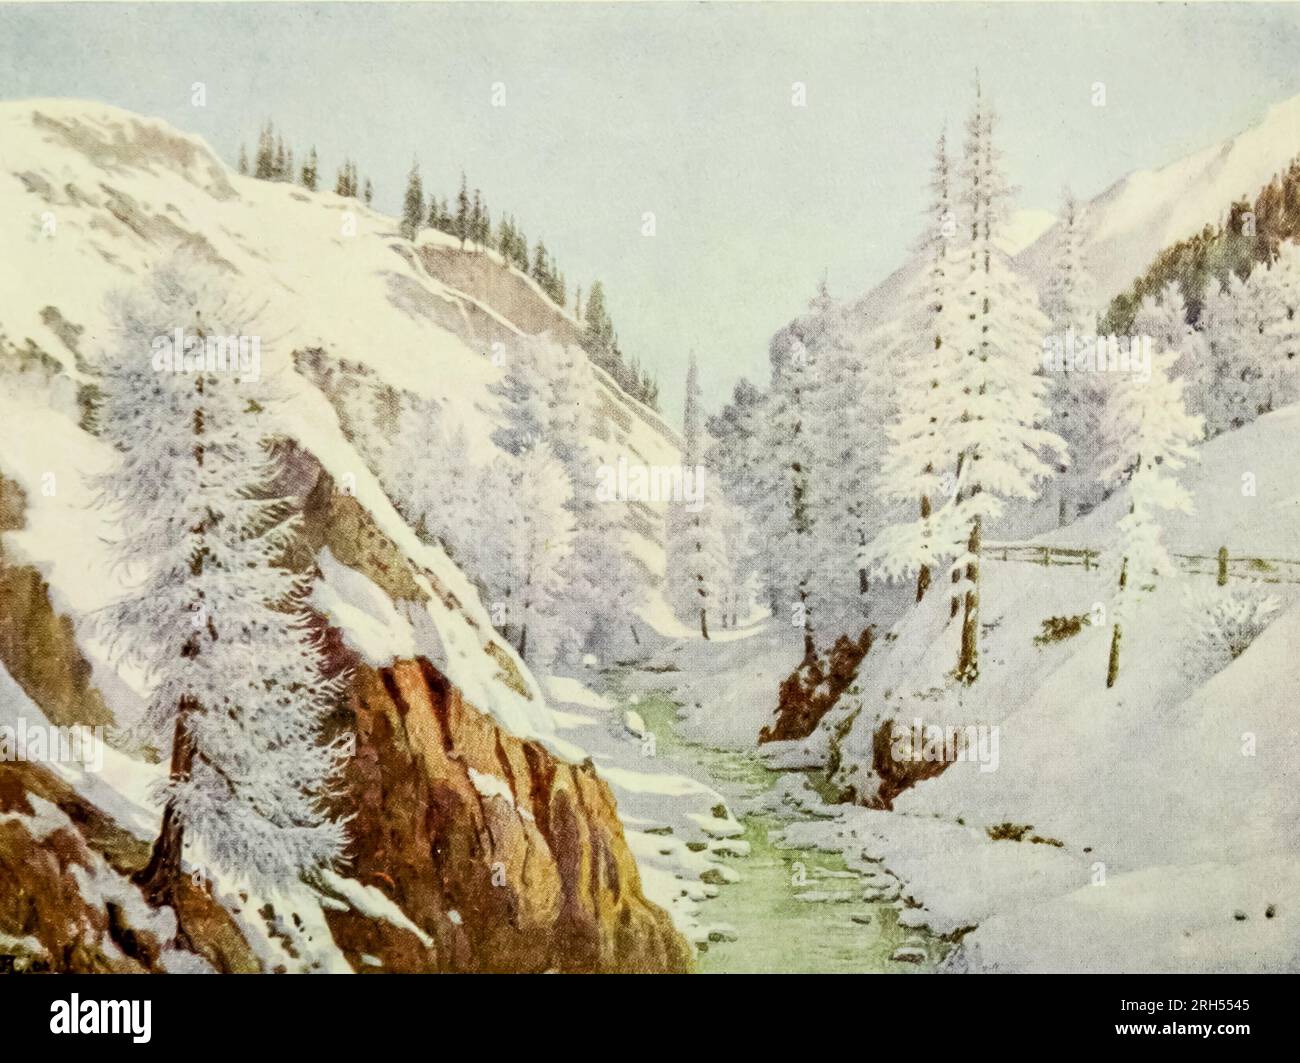 Inn Valley in Winter aquarelle painting from the book ' Austria-Hungary ' by Mitton, G. E. (Geraldine Edith) publication date 1915 London A. and C. Black Banque D'Images